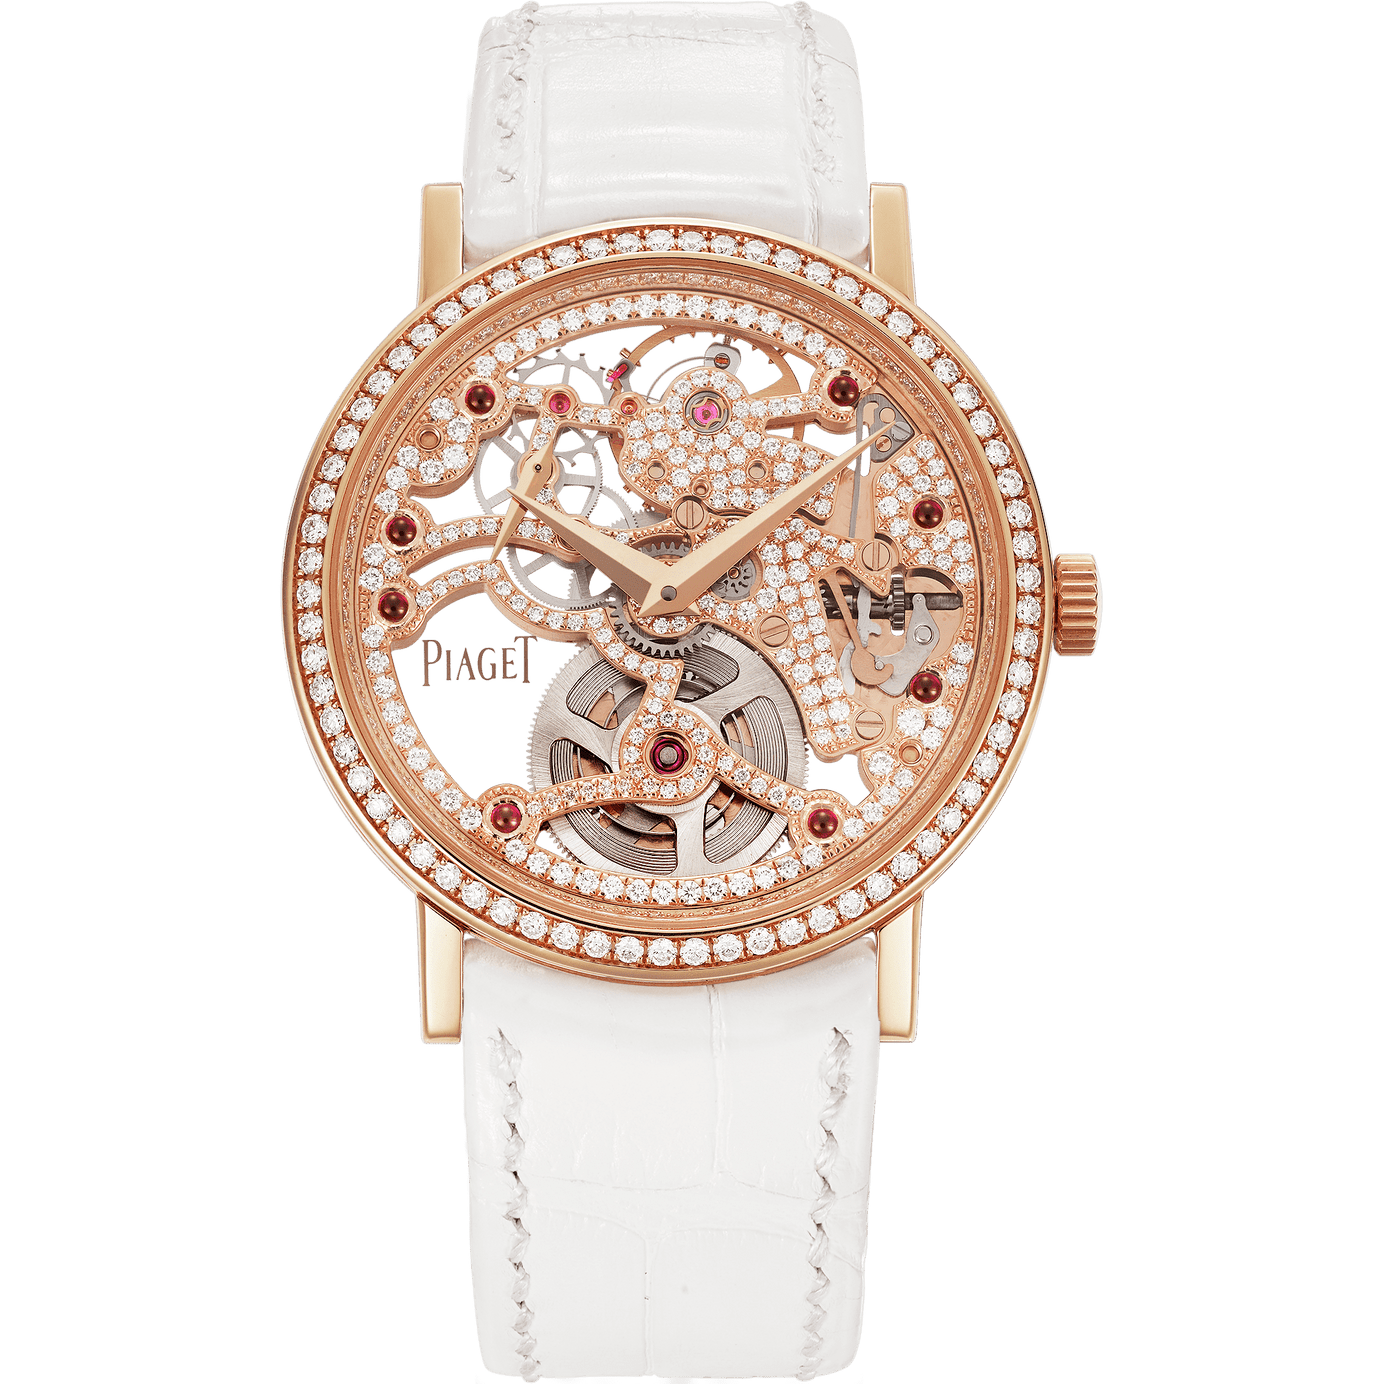 Jewelry and diamond watches women's small and exquisite women's watches  gold retro ladies genuine.